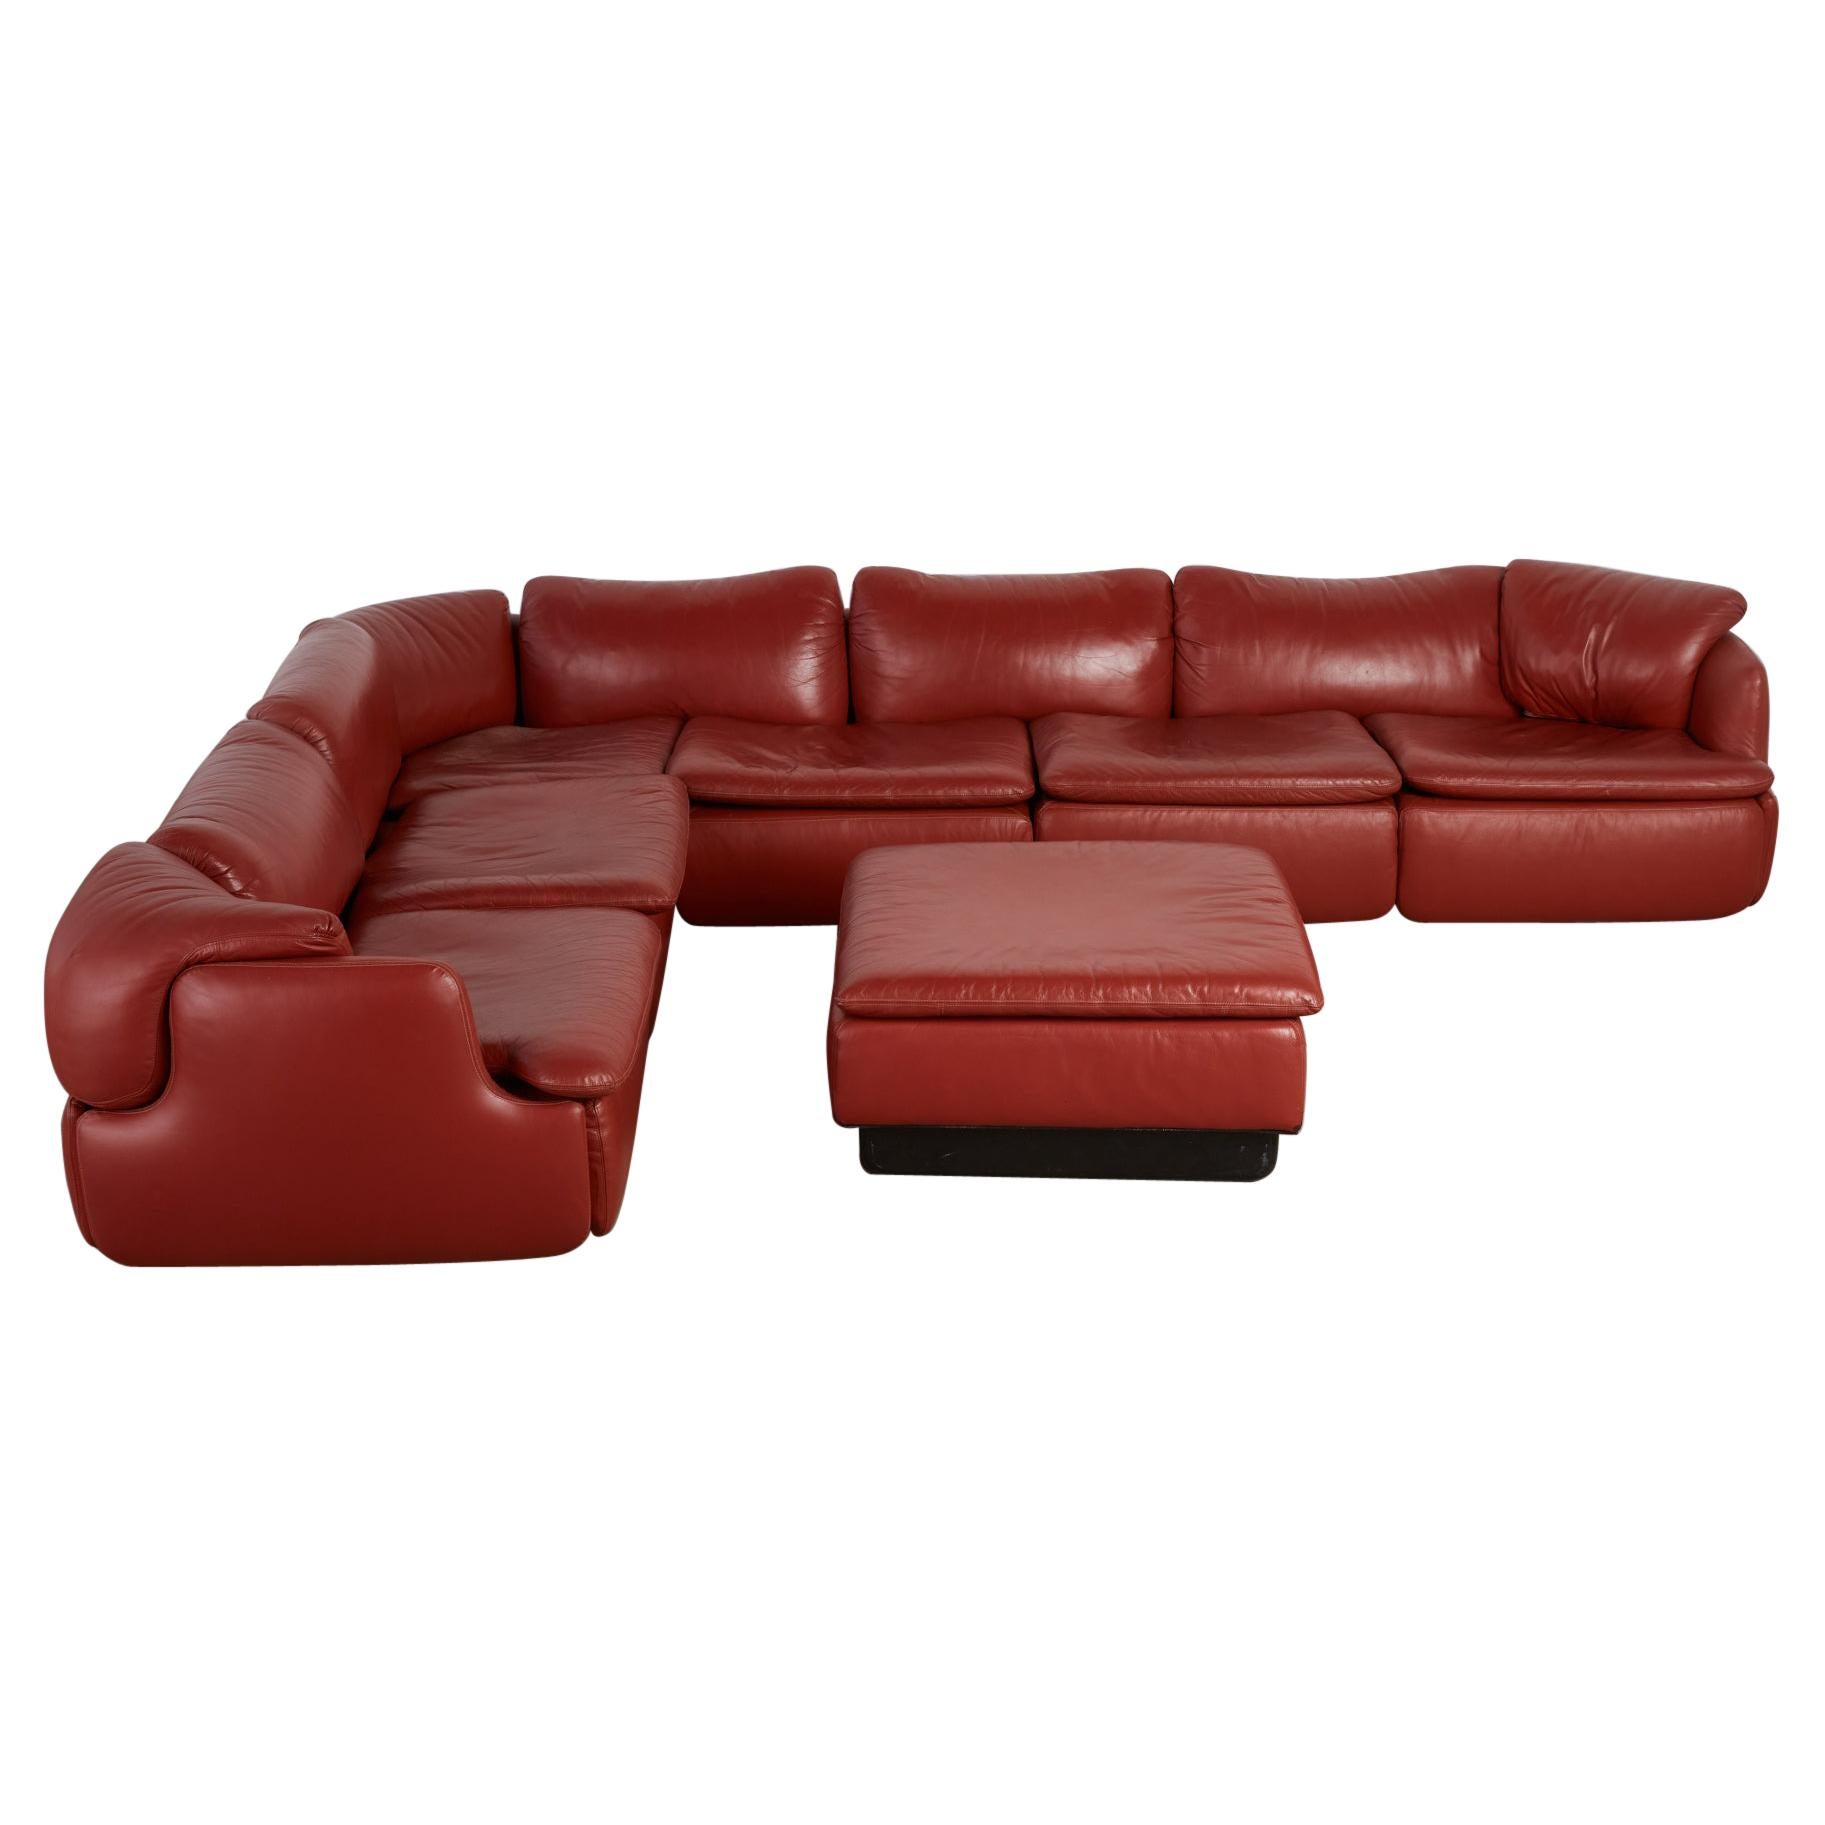 Alberto Rosselli "Confidential" Leather Sectional by Saporiti